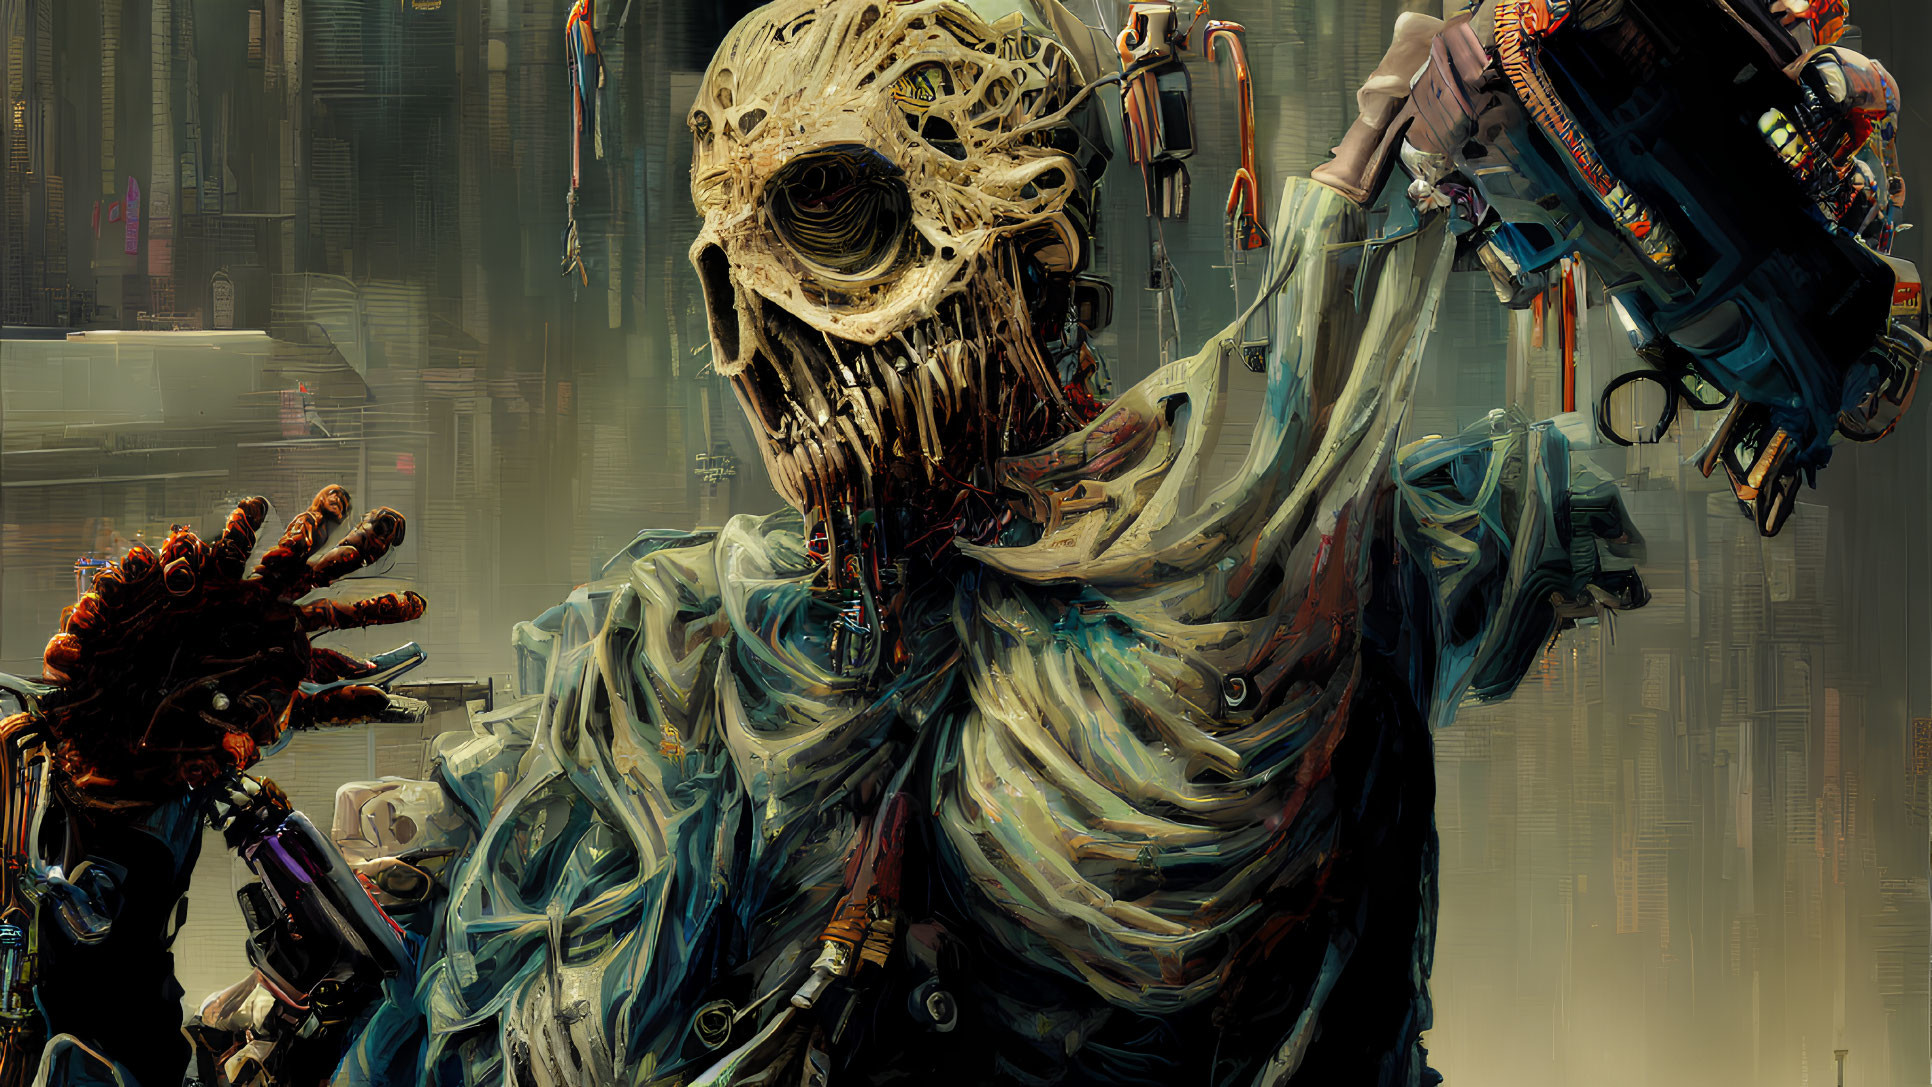 Detailed Cyborg Artwork with Skull-like Face and Mechanical Parts in Tattered Blue Fabric